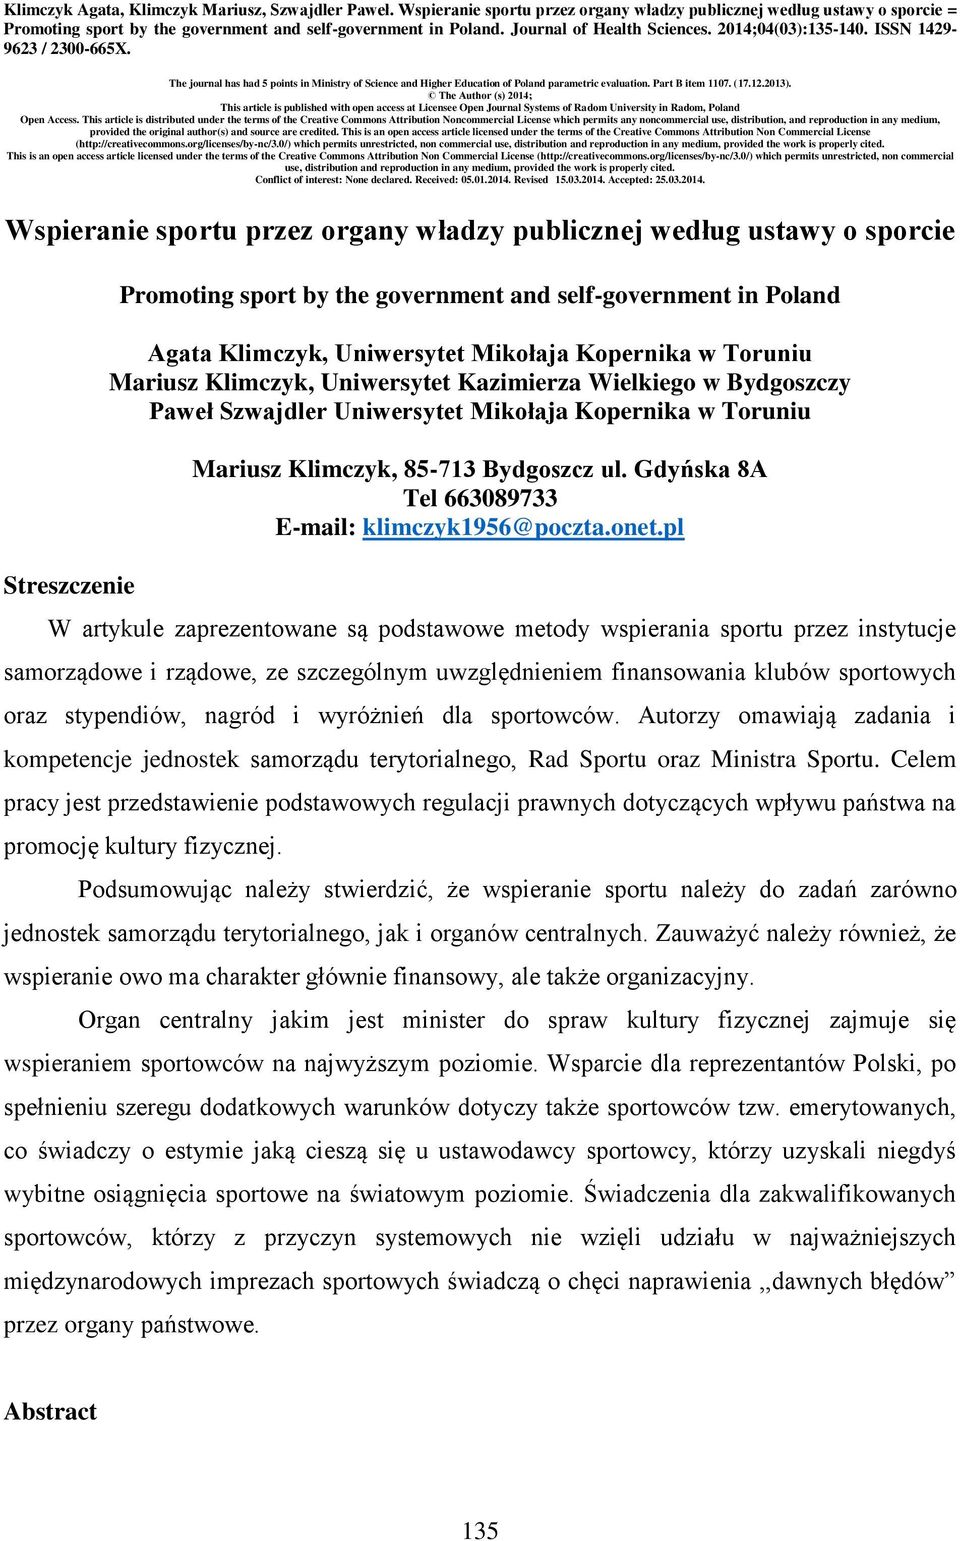 (17.12.2013). The Author (s) 2014; This article is published with open access at Licensee Open Journal Systems of Radom University in Radom, Poland Open Access.